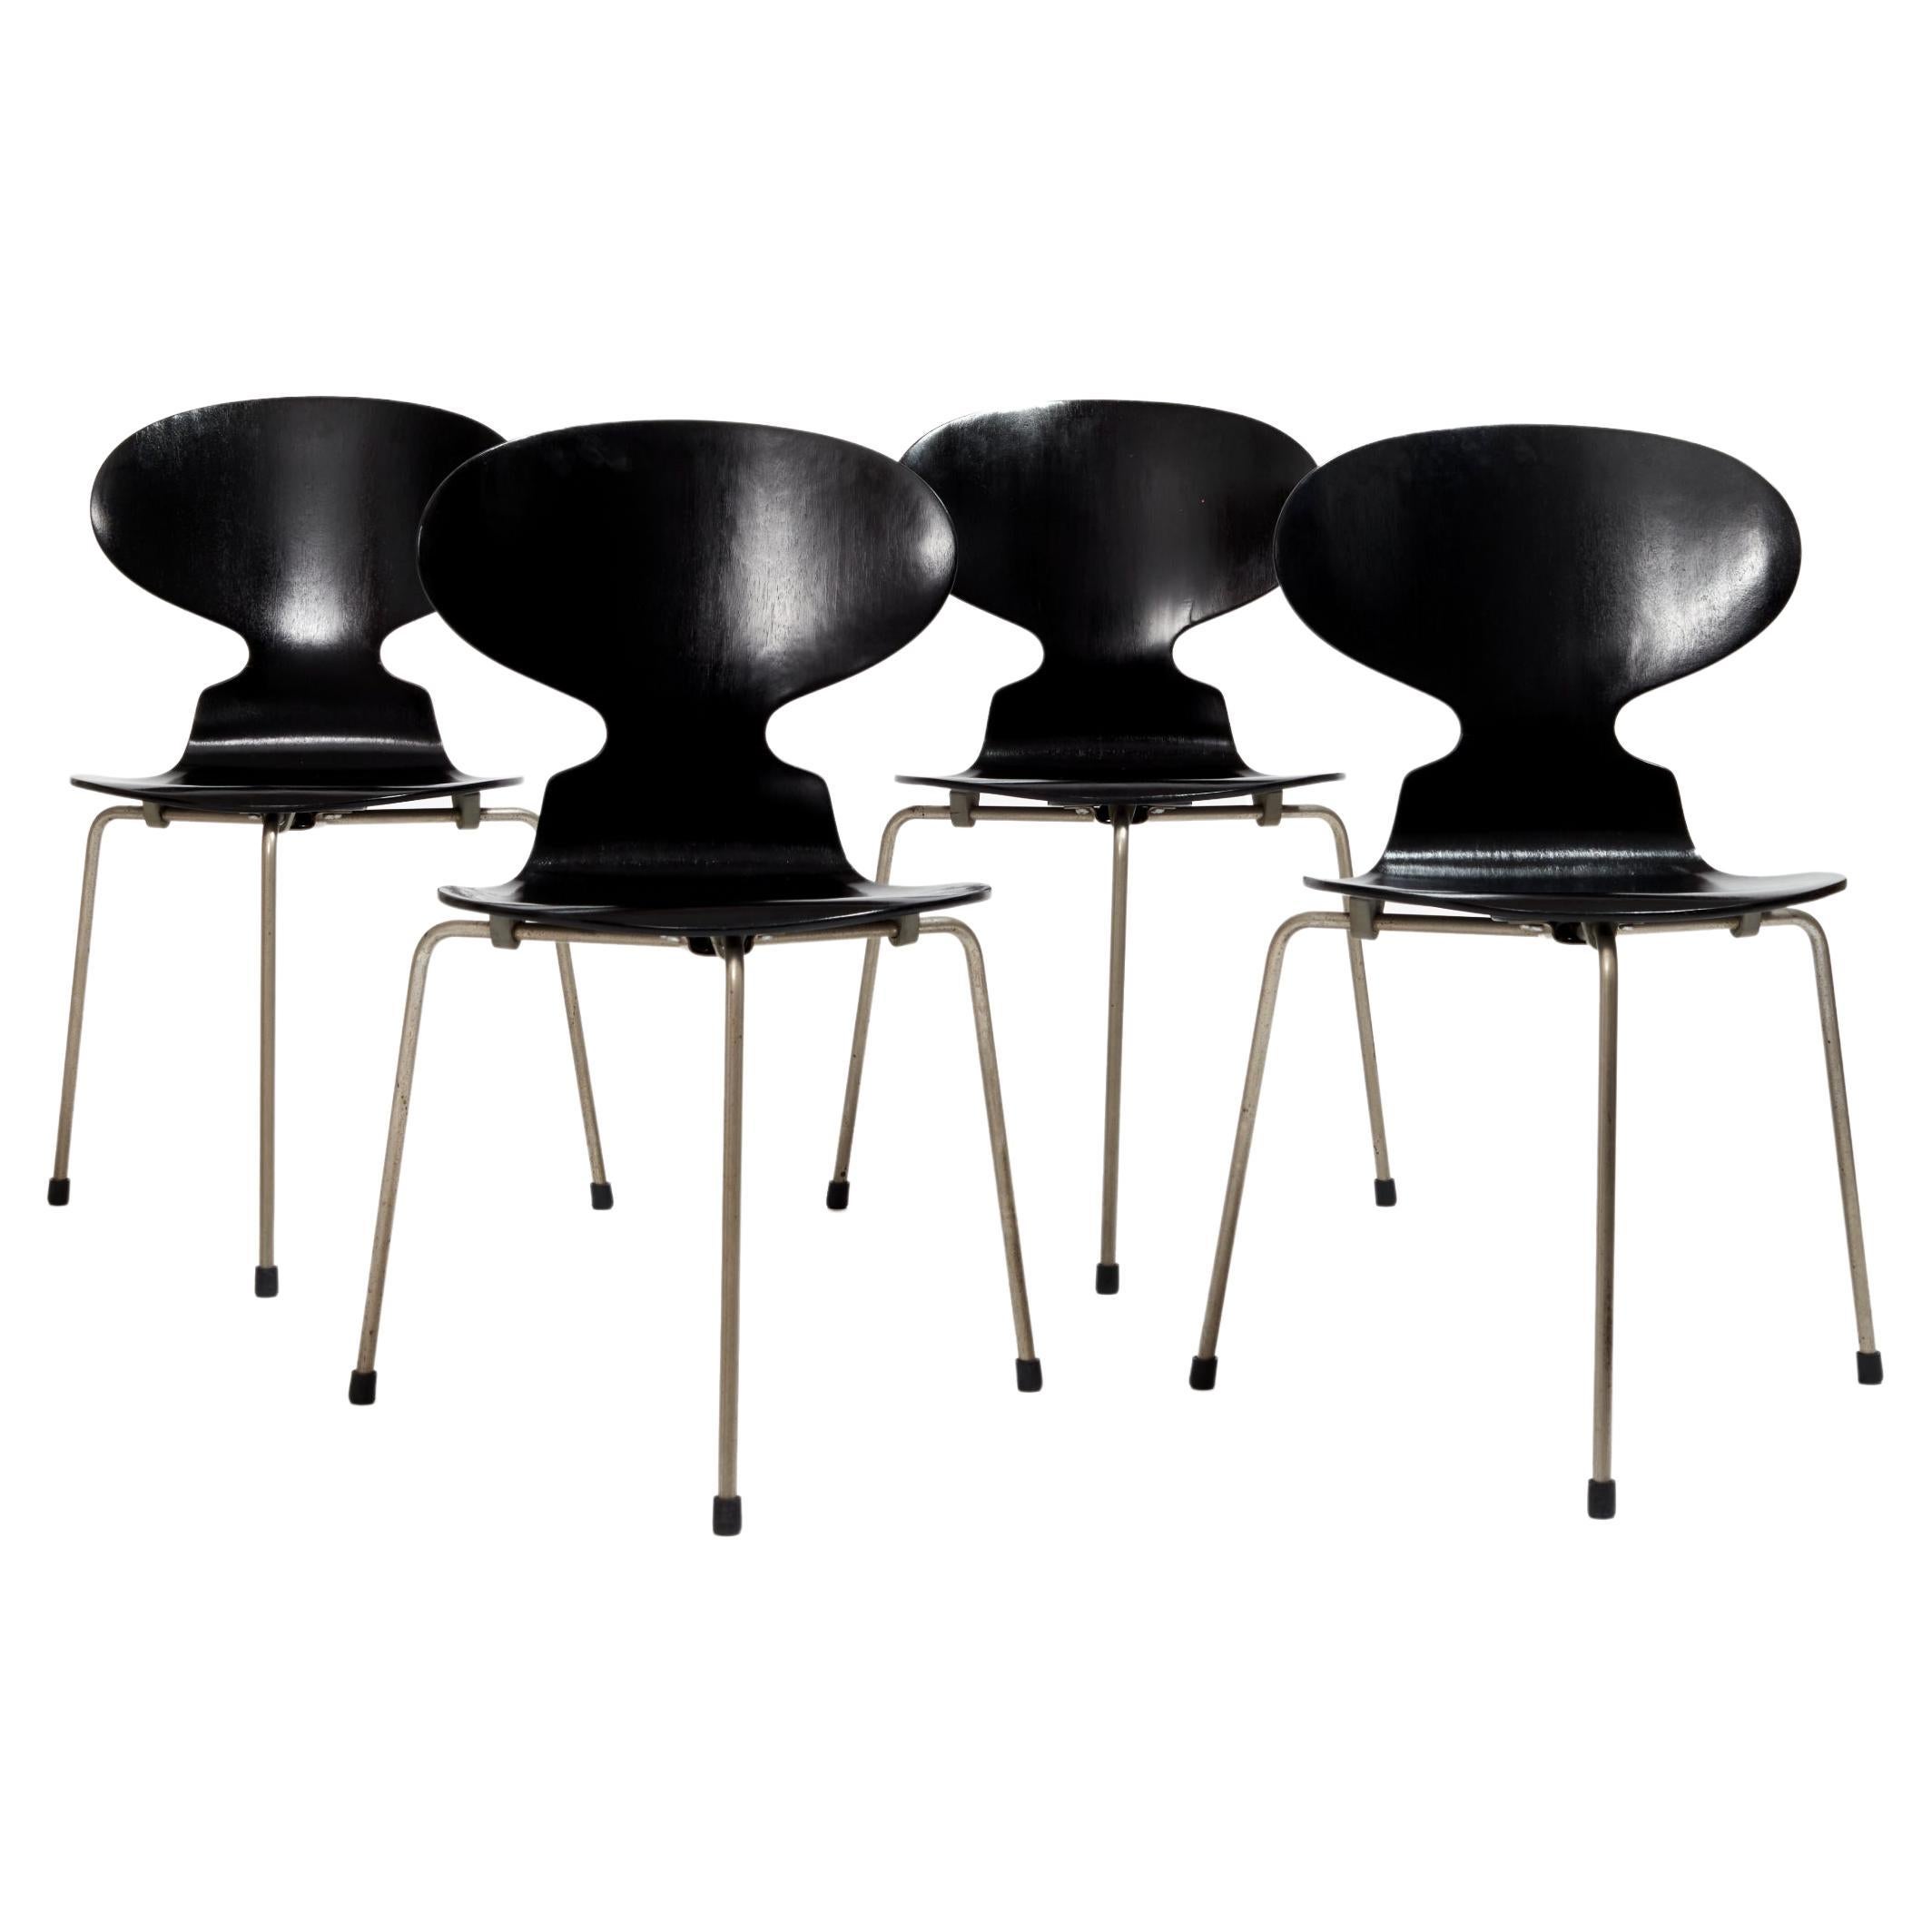 Set of Vintage Original Ant Chairs by Arne Jacobsen for Fritz Hansen